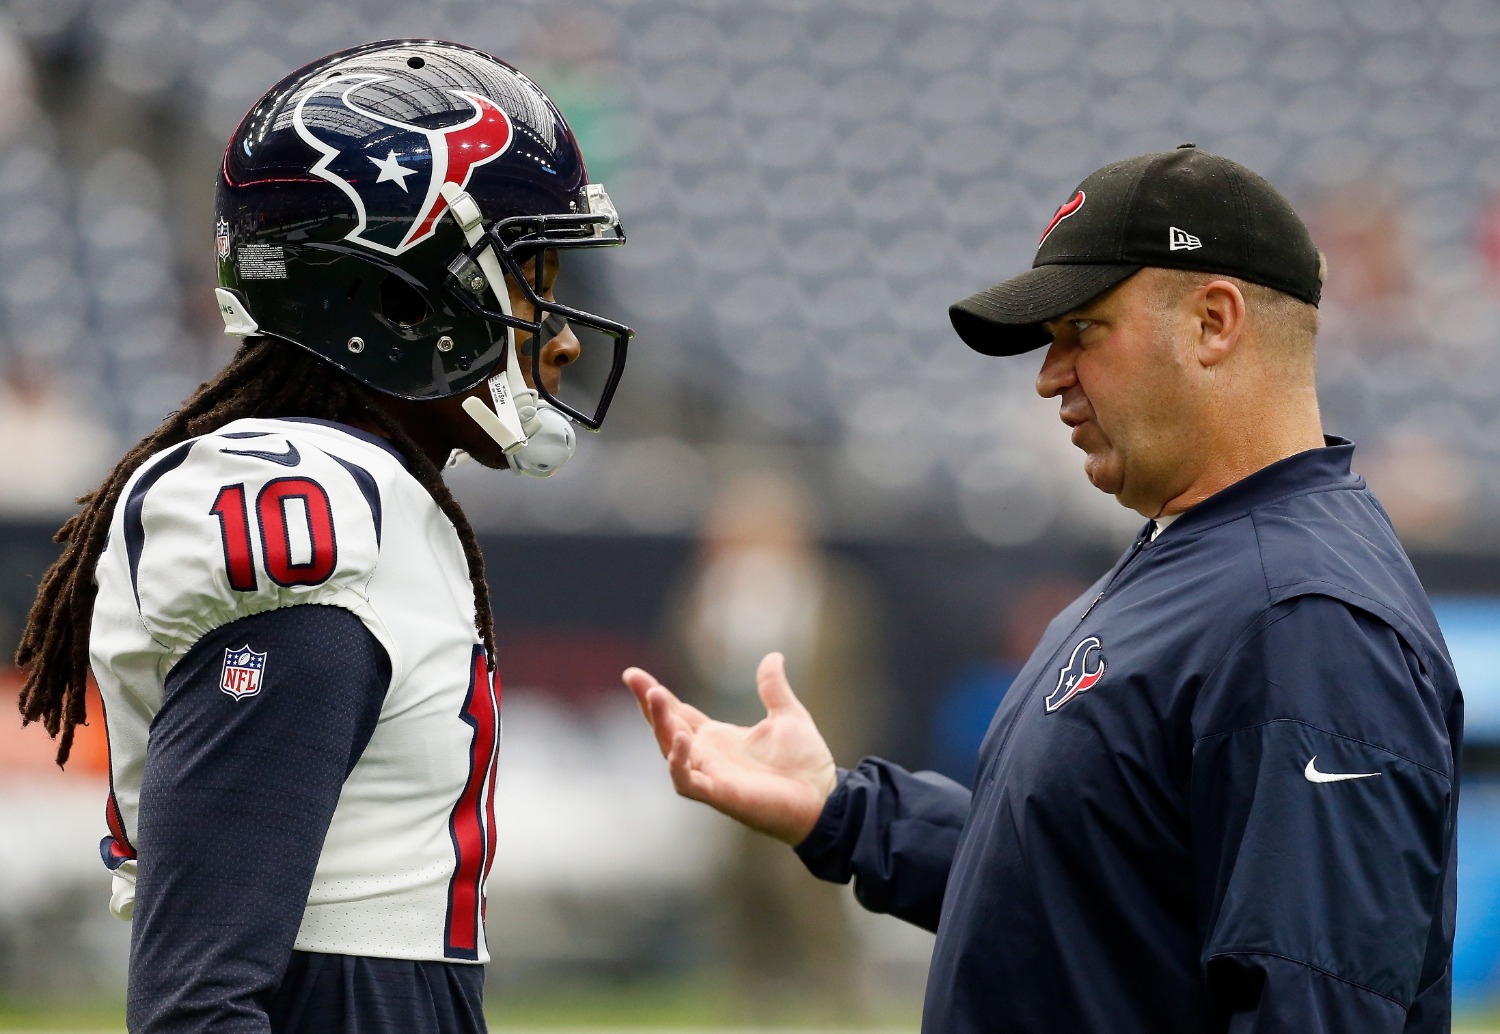 DeAndre Hopkins threw serious shade at Texans coach Bill O'Brien in a tweet praising Patrick Mahomes and his well-deserved contract.